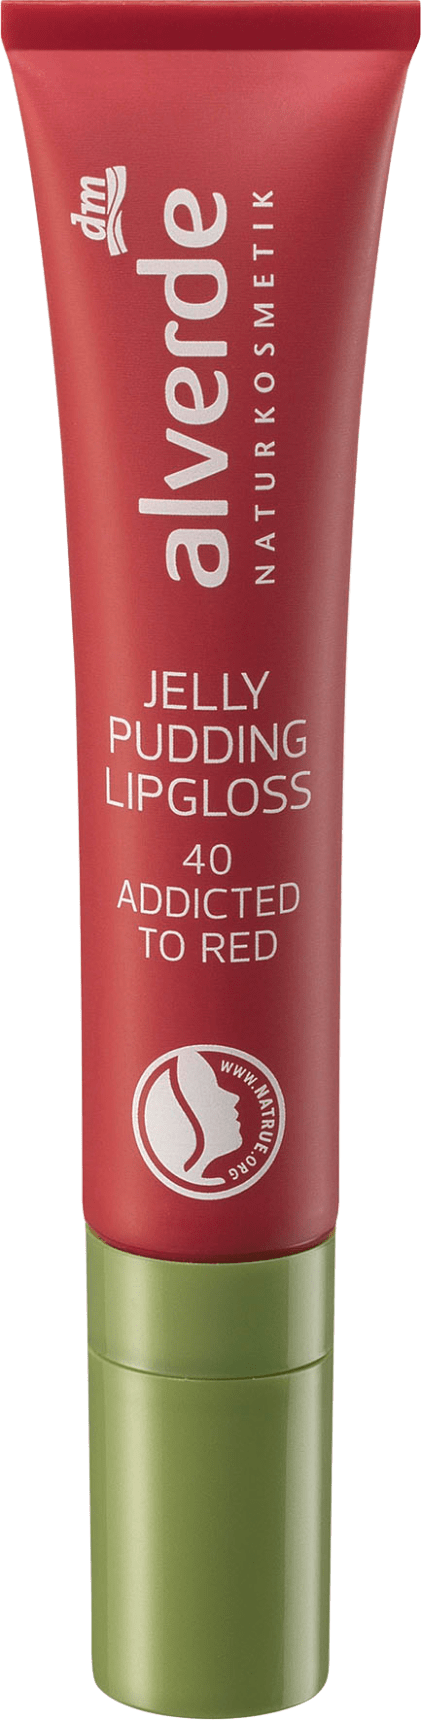 Lipgloss Jelly Pudding Addicted To Red 40, 10 Ml